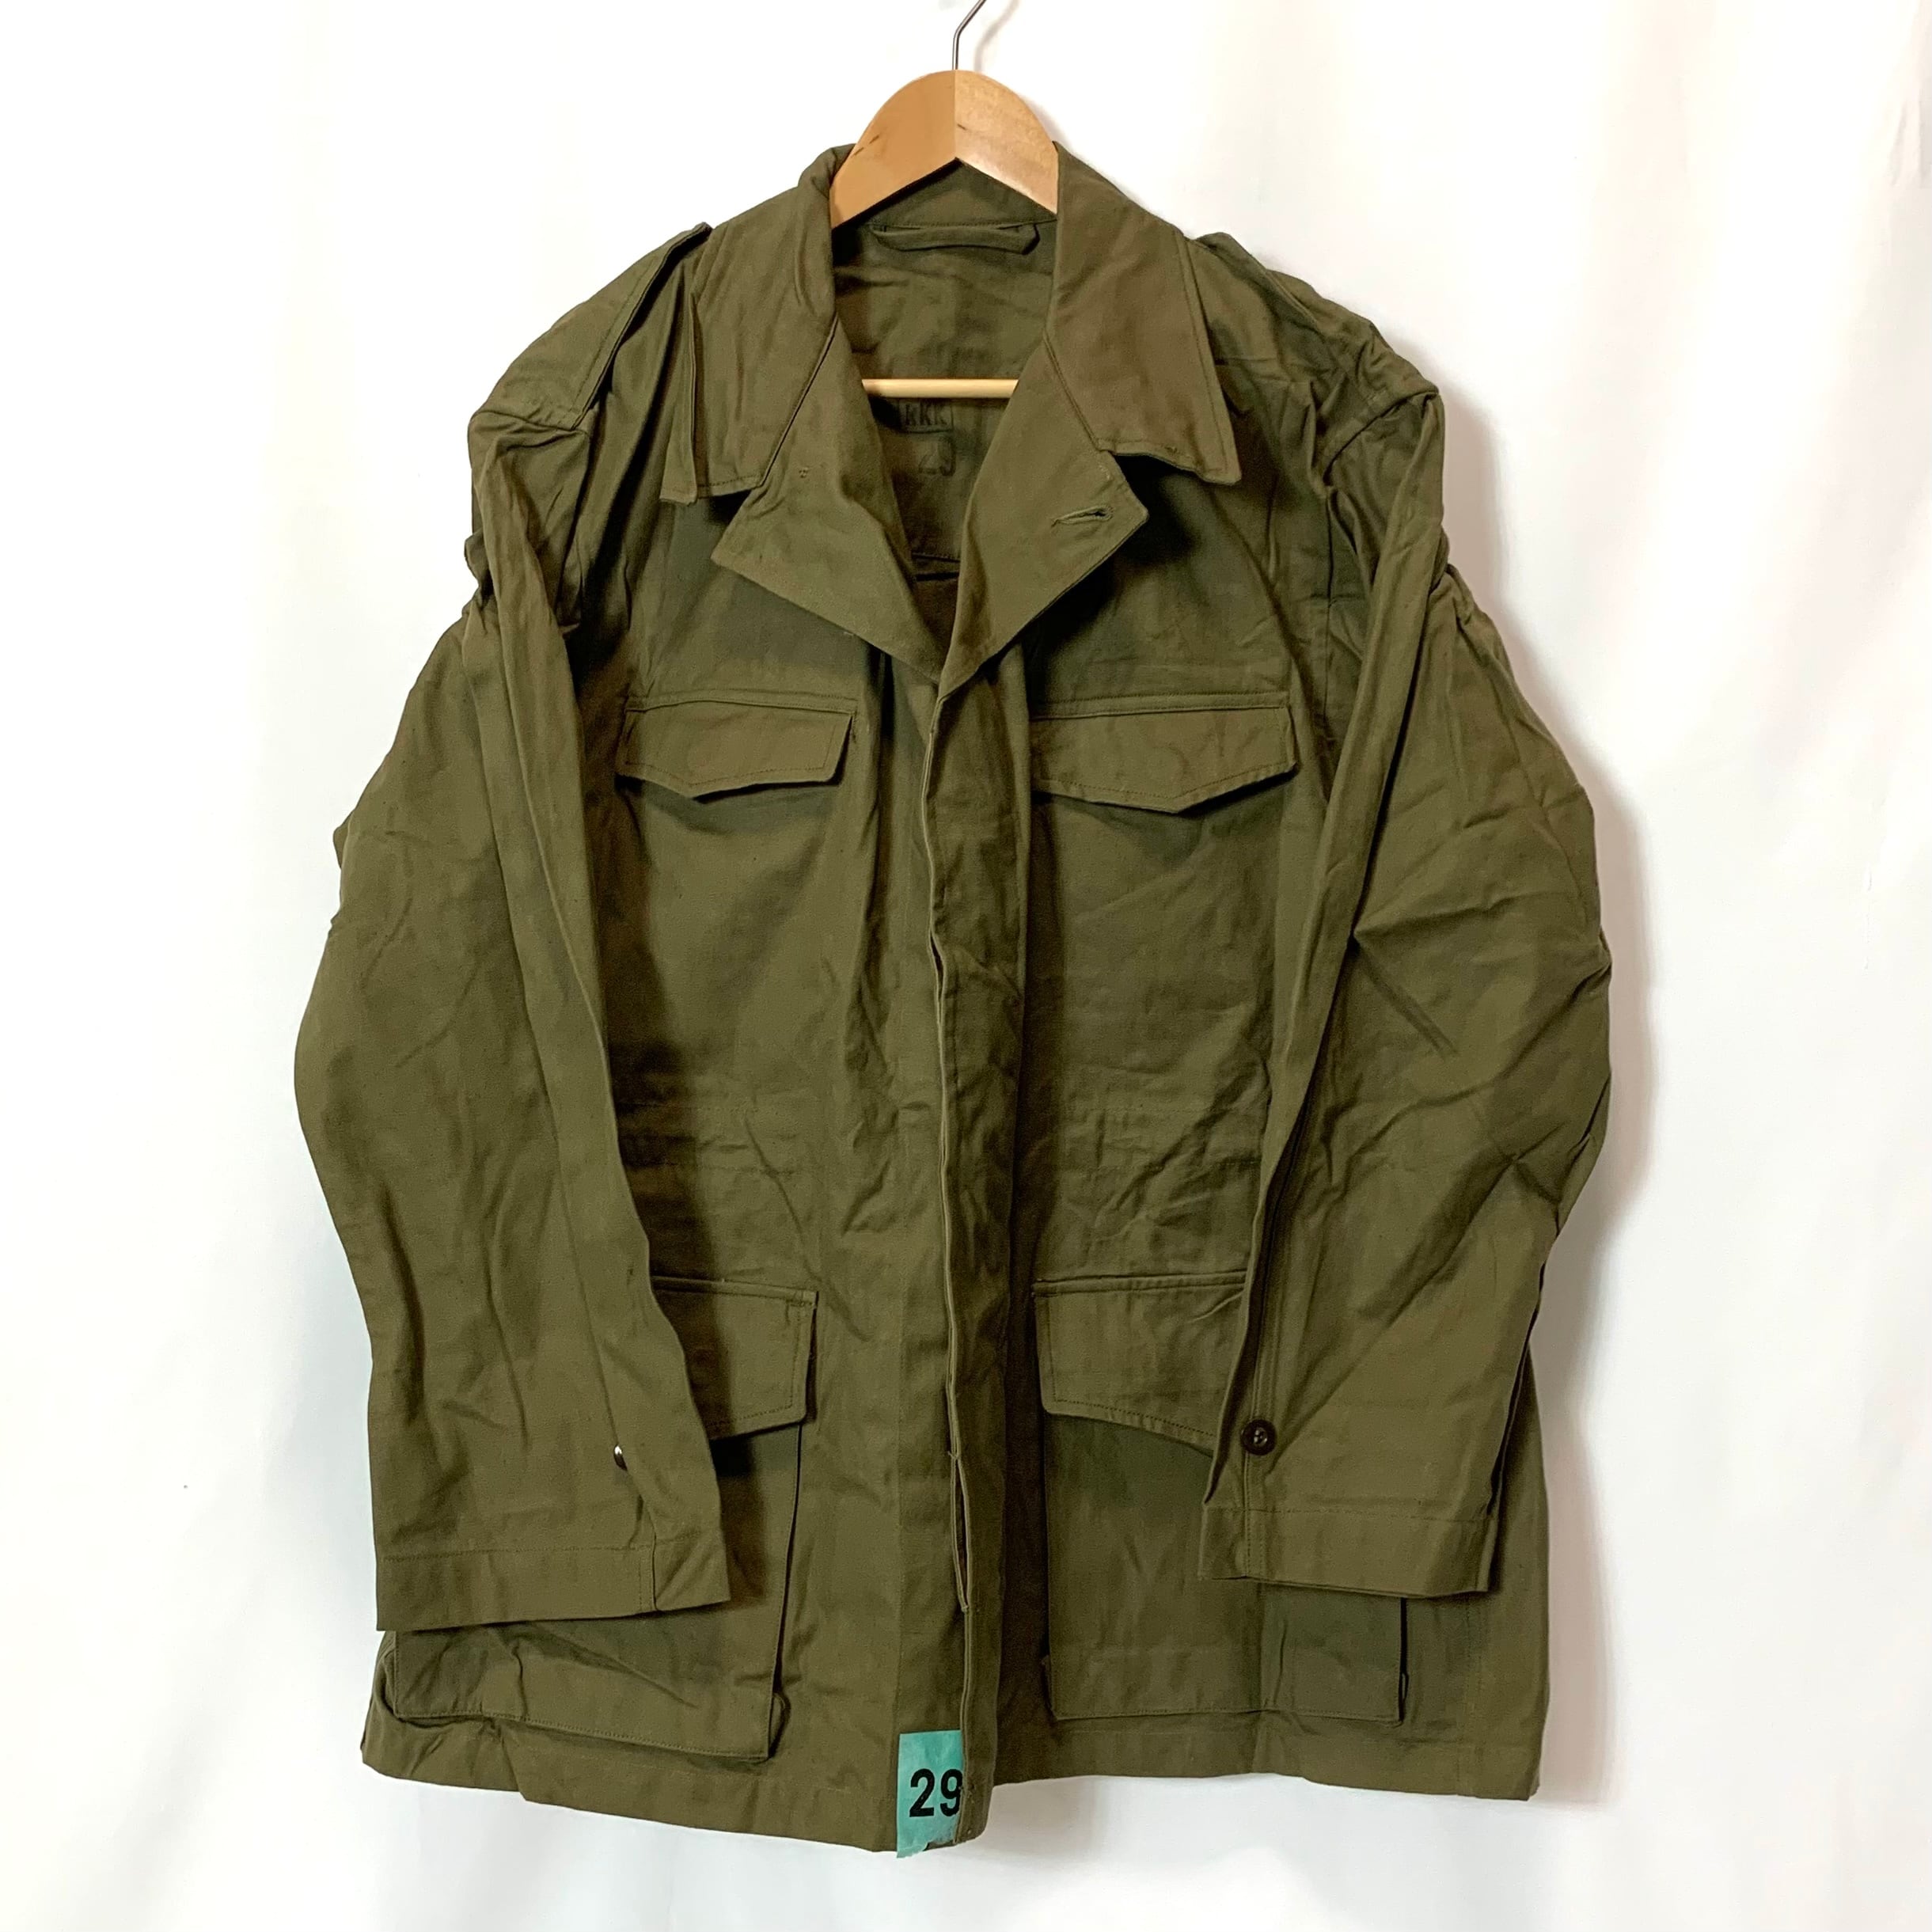 vintage old french military jacket 50s deadstock M-47 フランス軍